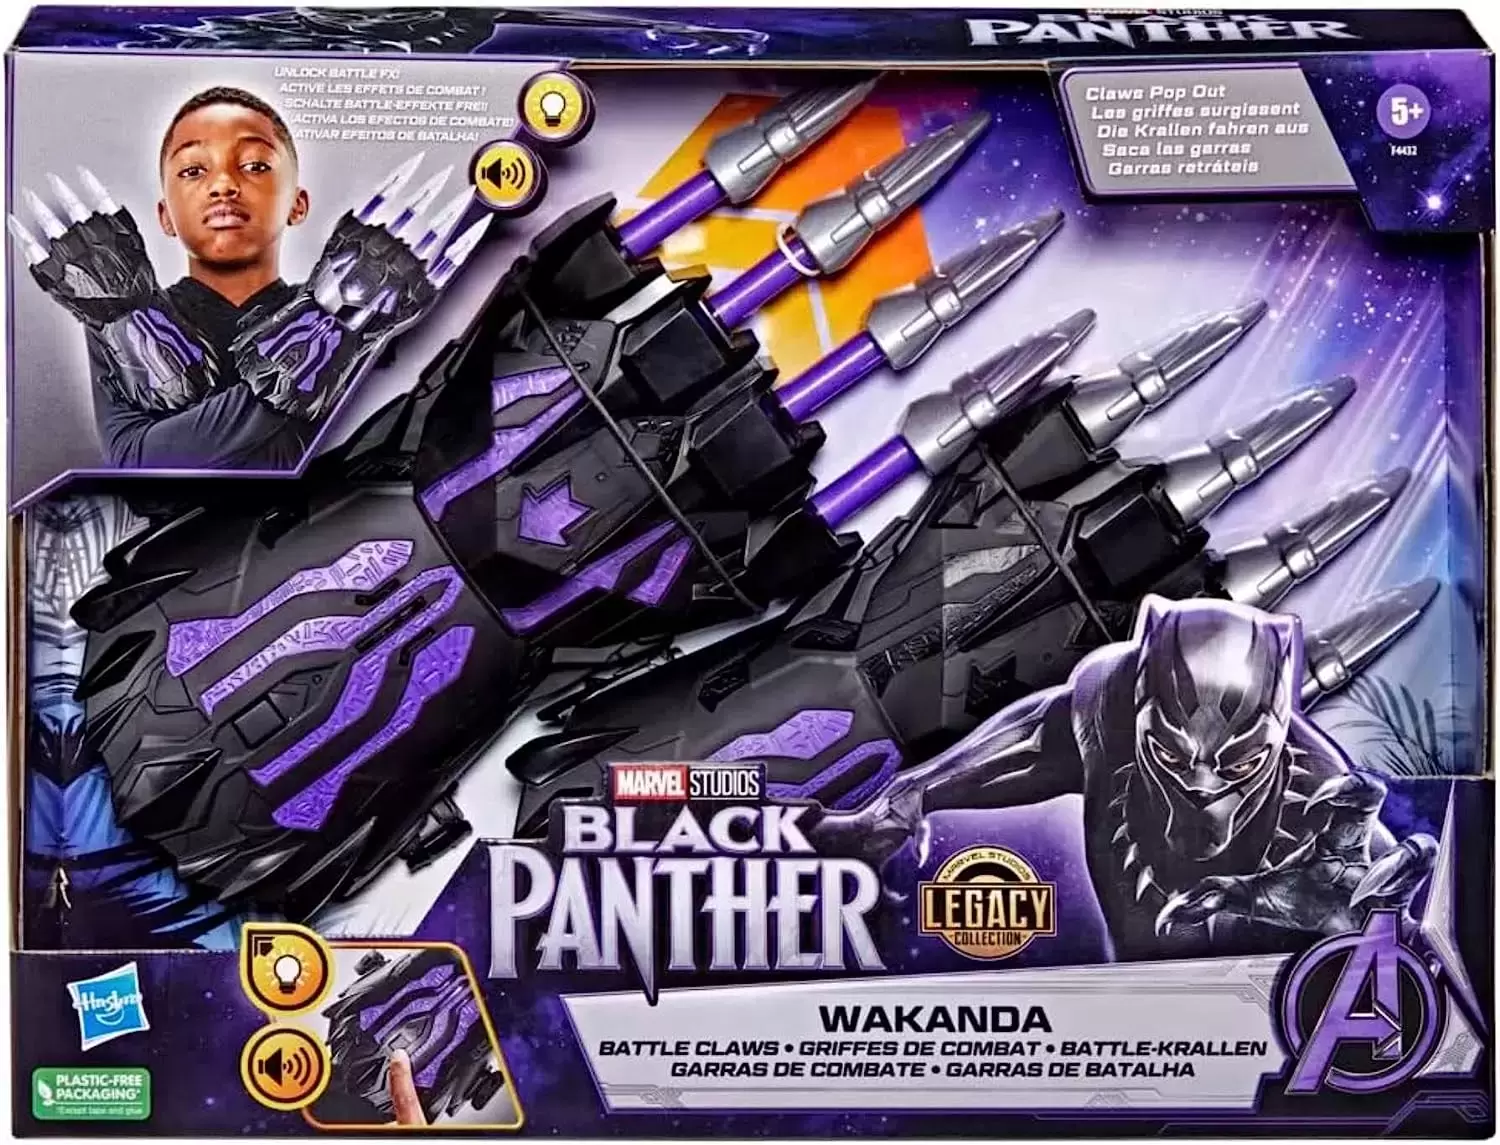 Marvel Studios Legacy Collection - Black Panther - Wakanda Battle Claws